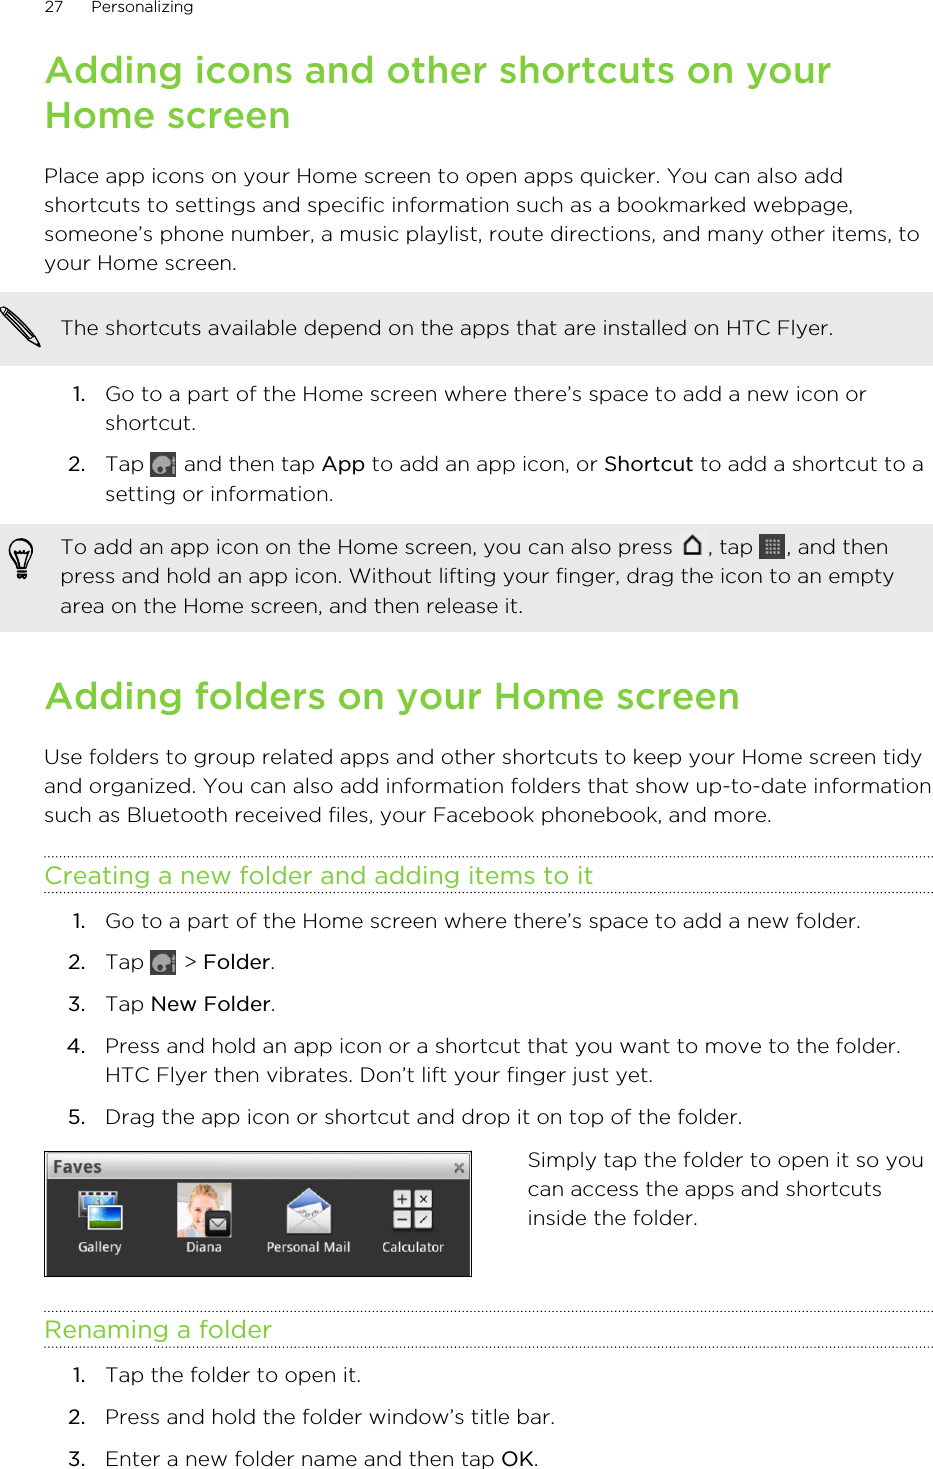 Adding icons and other shortcuts on yourHome screenPlace app icons on your Home screen to open apps quicker. You can also addshortcuts to settings and specific information such as a bookmarked webpage,someone’s phone number, a music playlist, route directions, and many other items, toyour Home screen.The shortcuts available depend on the apps that are installed on HTC Flyer.1. Go to a part of the Home screen where there’s space to add a new icon orshortcut.2. Tap   and then tap App to add an app icon, or Shortcut to add a shortcut to asetting or information.To add an app icon on the Home screen, you can also press  , tap  , and thenpress and hold an app icon. Without lifting your finger, drag the icon to an emptyarea on the Home screen, and then release it.Adding folders on your Home screenUse folders to group related apps and other shortcuts to keep your Home screen tidyand organized. You can also add information folders that show up-to-date informationsuch as Bluetooth received files, your Facebook phonebook, and more.Creating a new folder and adding items to it1. Go to a part of the Home screen where there’s space to add a new folder.2. Tap   &gt; Folder.3. Tap New Folder.4. Press and hold an app icon or a shortcut that you want to move to the folder.HTC Flyer then vibrates. Don’t lift your finger just yet.5. Drag the app icon or shortcut and drop it on top of the folder.Simply tap the folder to open it so youcan access the apps and shortcutsinside the folder.Renaming a folder1. Tap the folder to open it.2. Press and hold the folder window’s title bar.3. Enter a new folder name and then tap OK.27 Personalizing